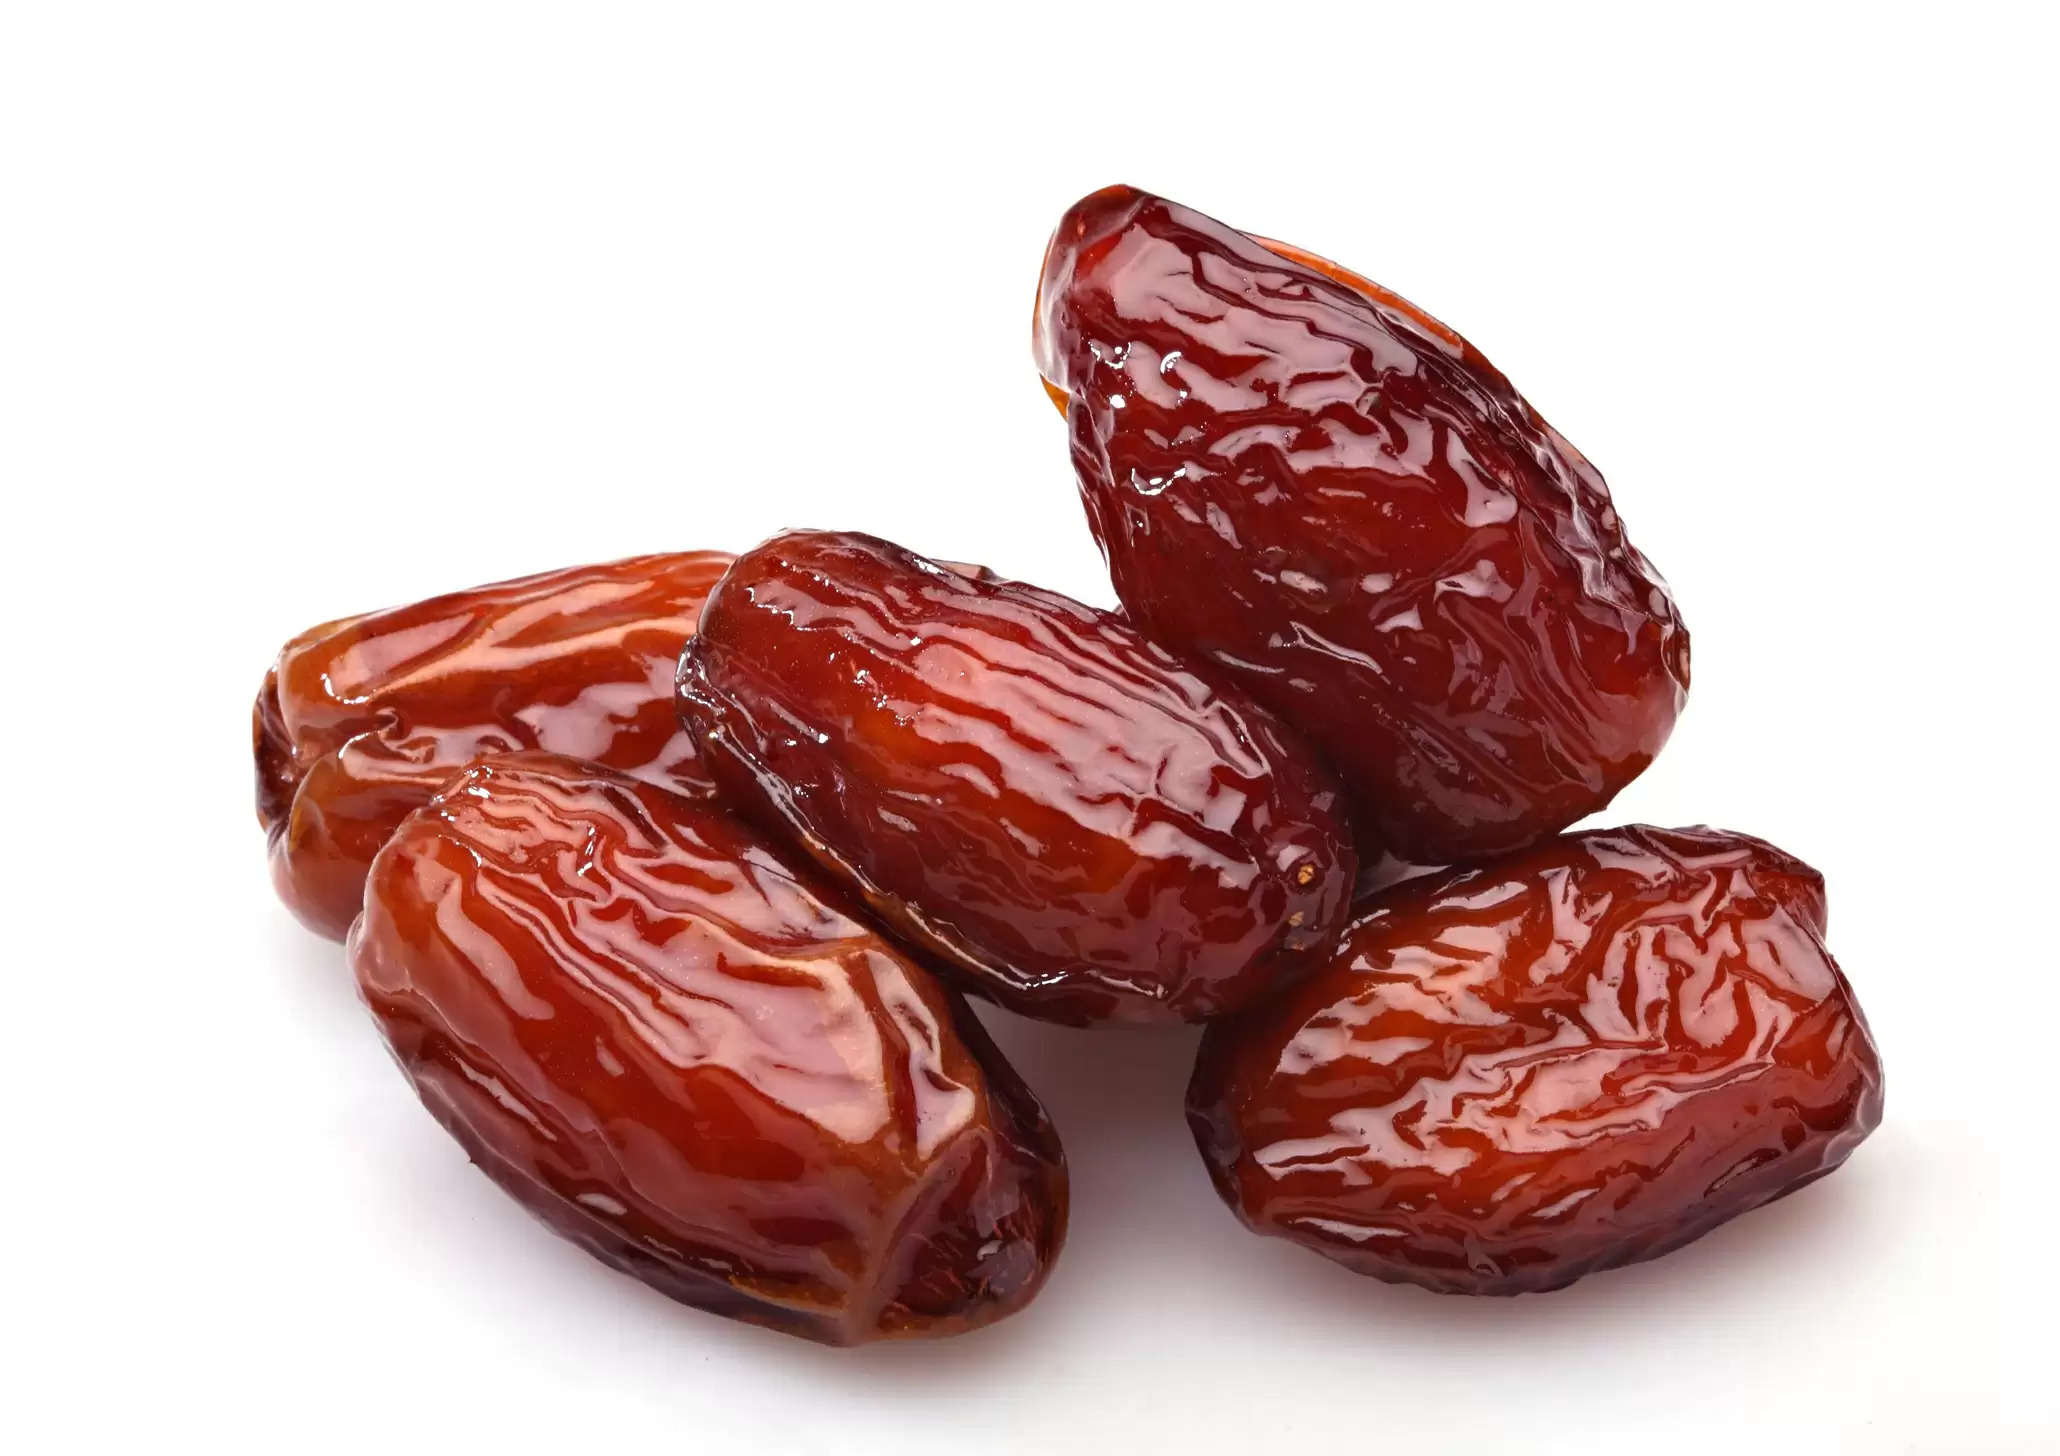 Benefits of eating Dates for your Skin, Hair & Weight Loss